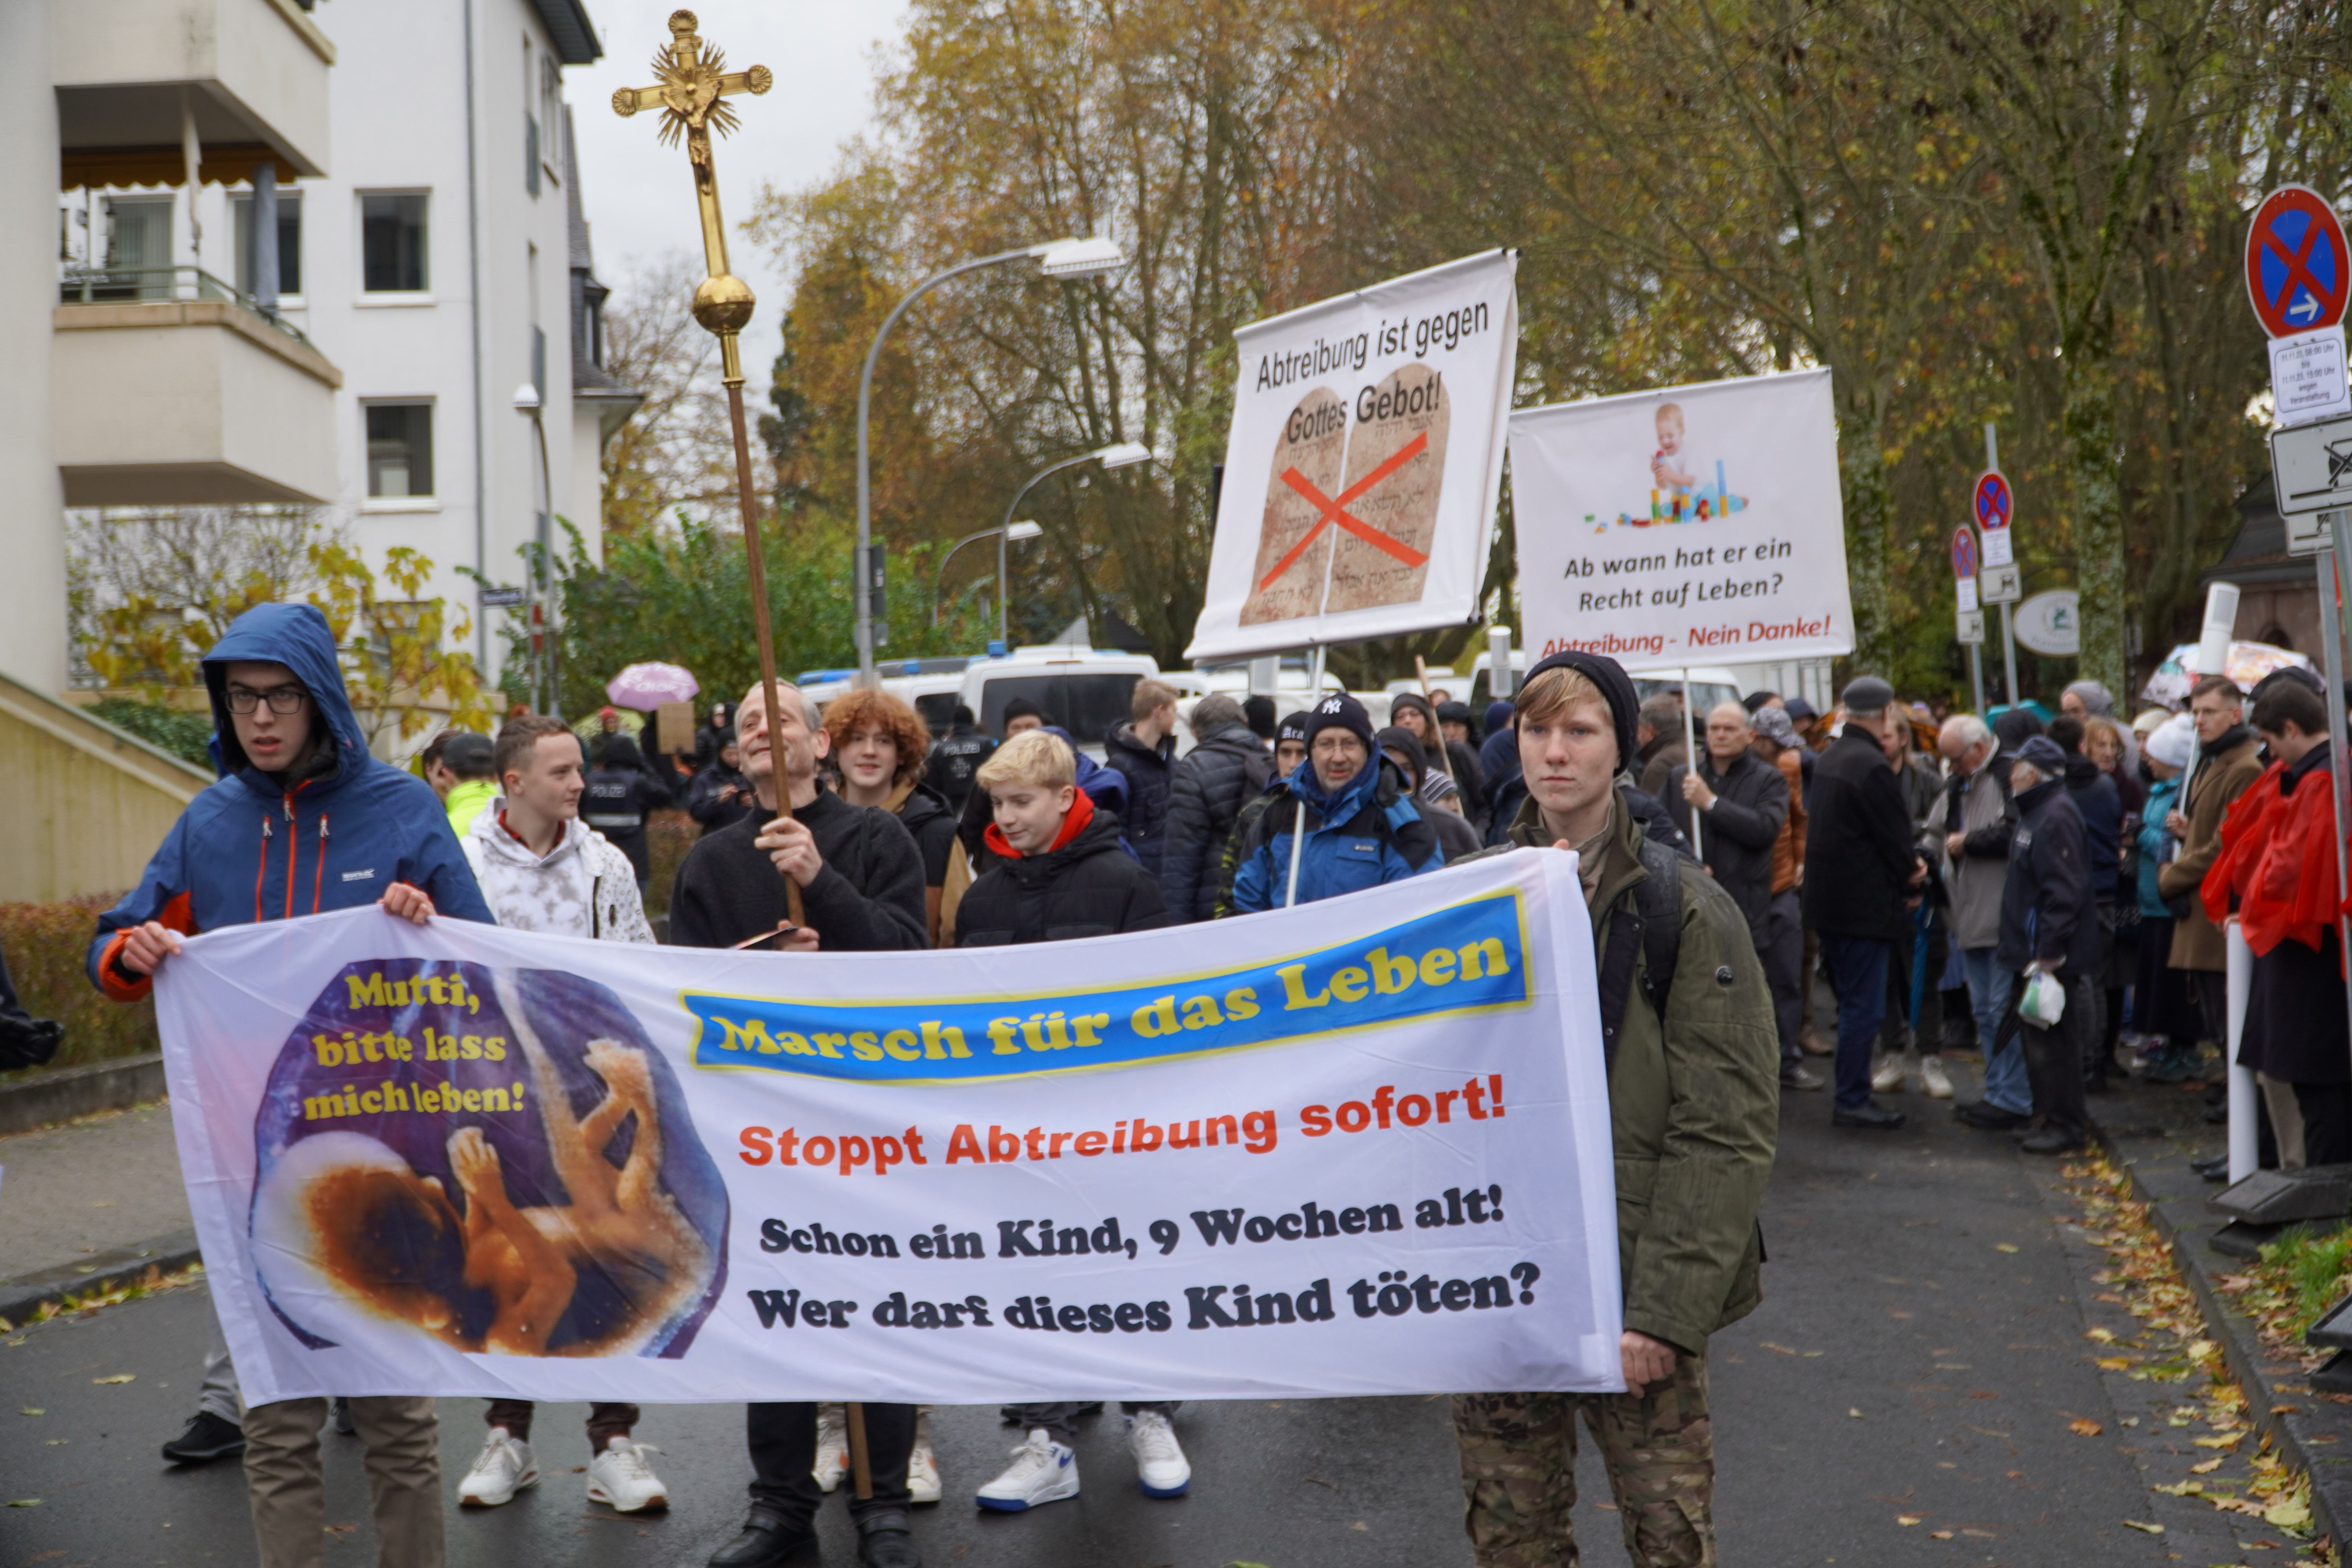 Hundreds march in Saarbrücken against the Sin of abortion!